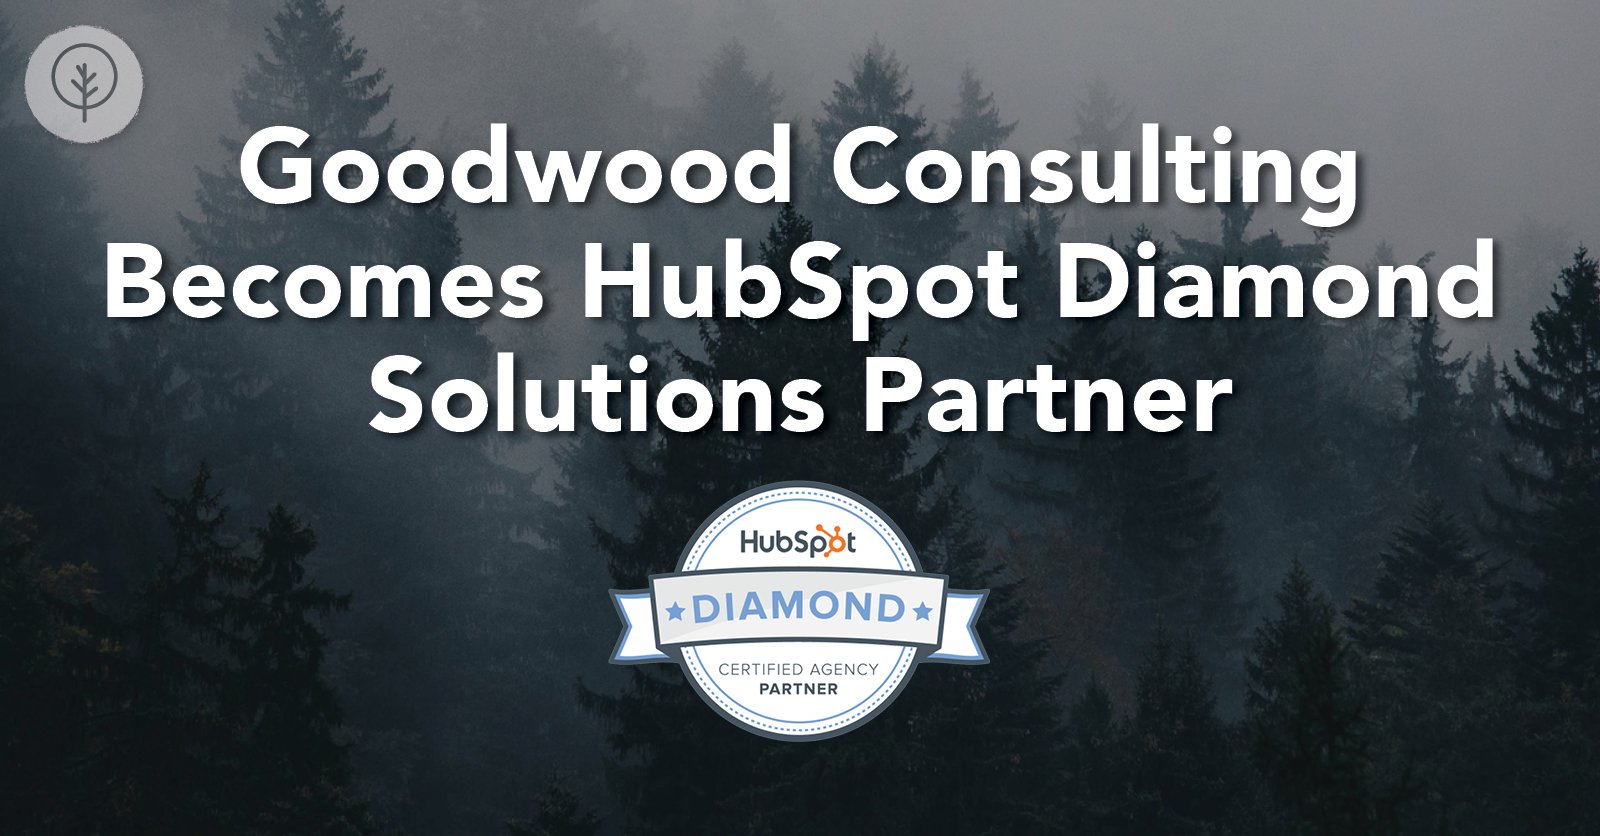 Goodwood Consulting Becomes HubSpot Diamond Solutions Partner